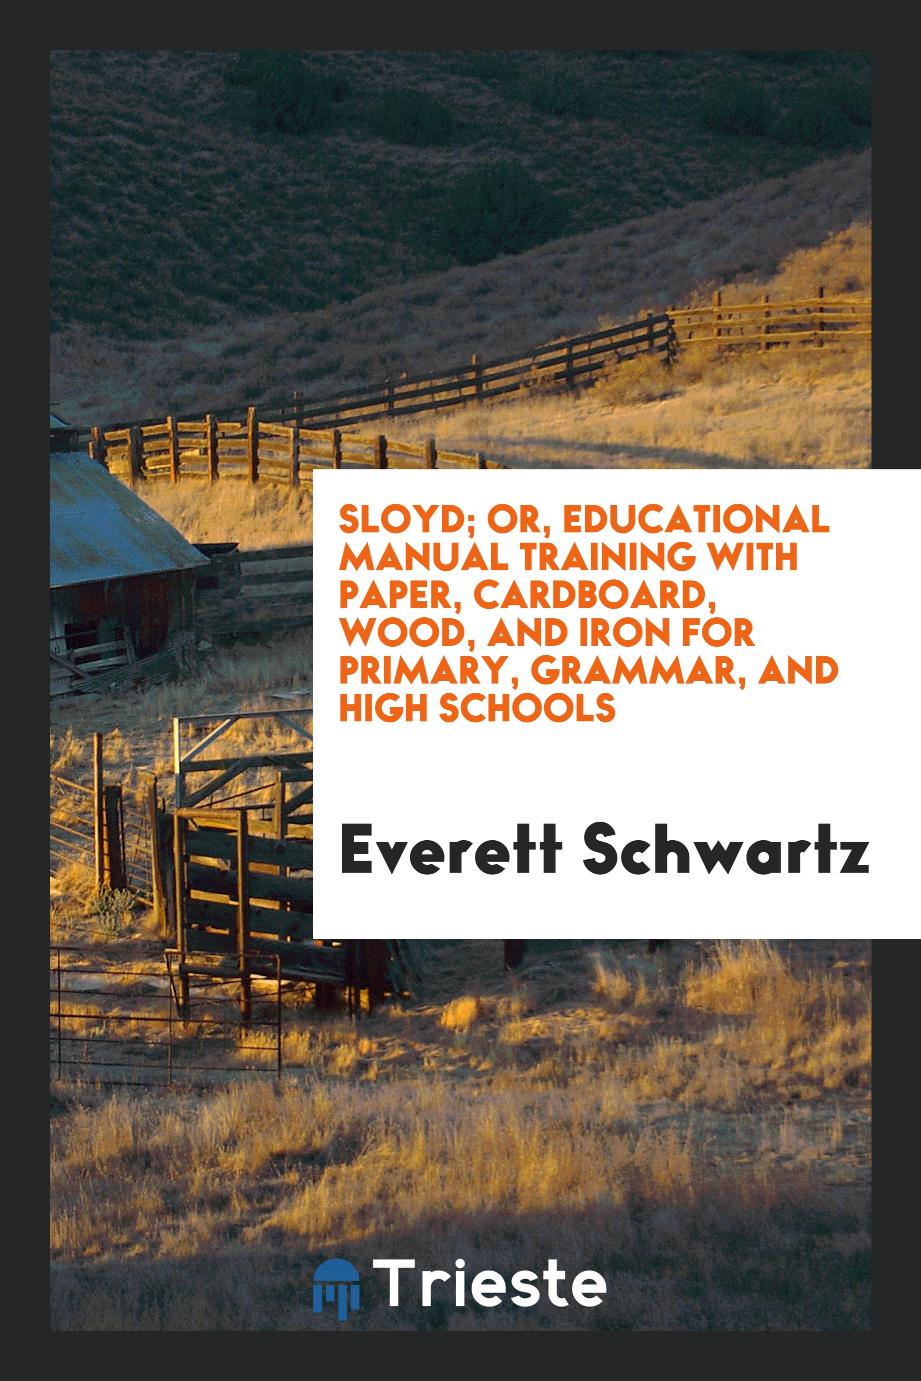 Sloyd; or, Educational manual training with paper, cardboard, wood, and iron for primary, grammar, and high schools